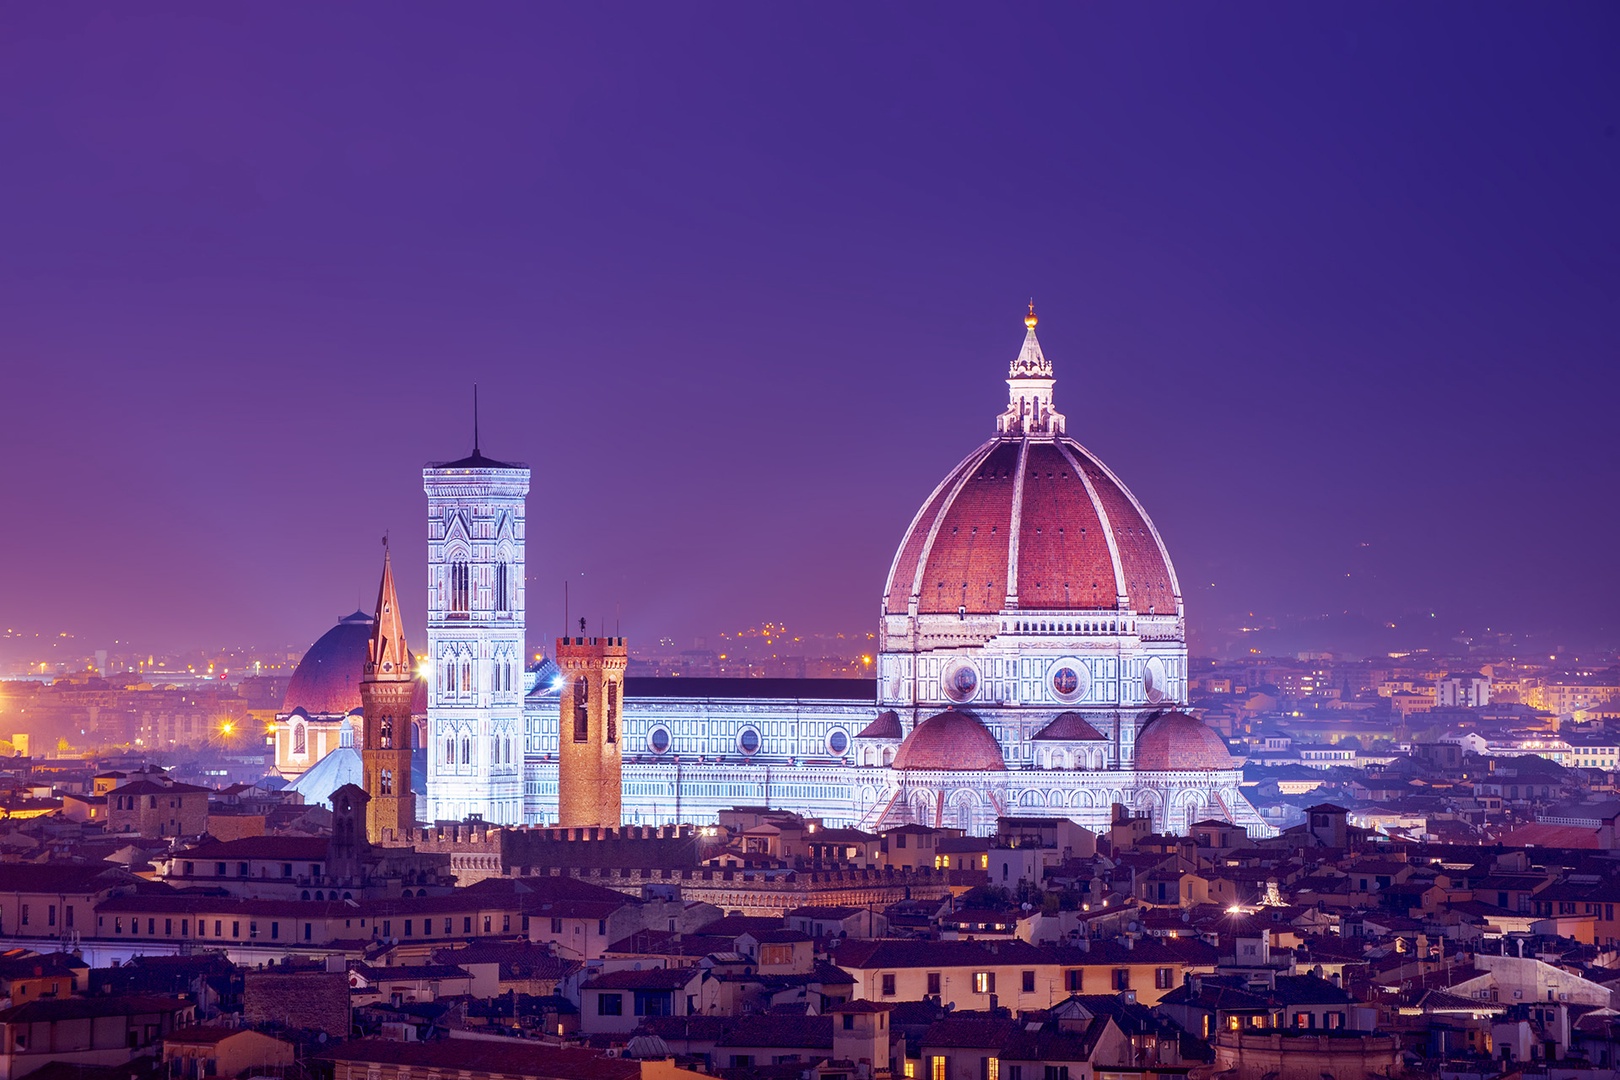 The Duomo, the cathedral Santa Maria del Fiore, glows and welcomes you to the City of Flowers.